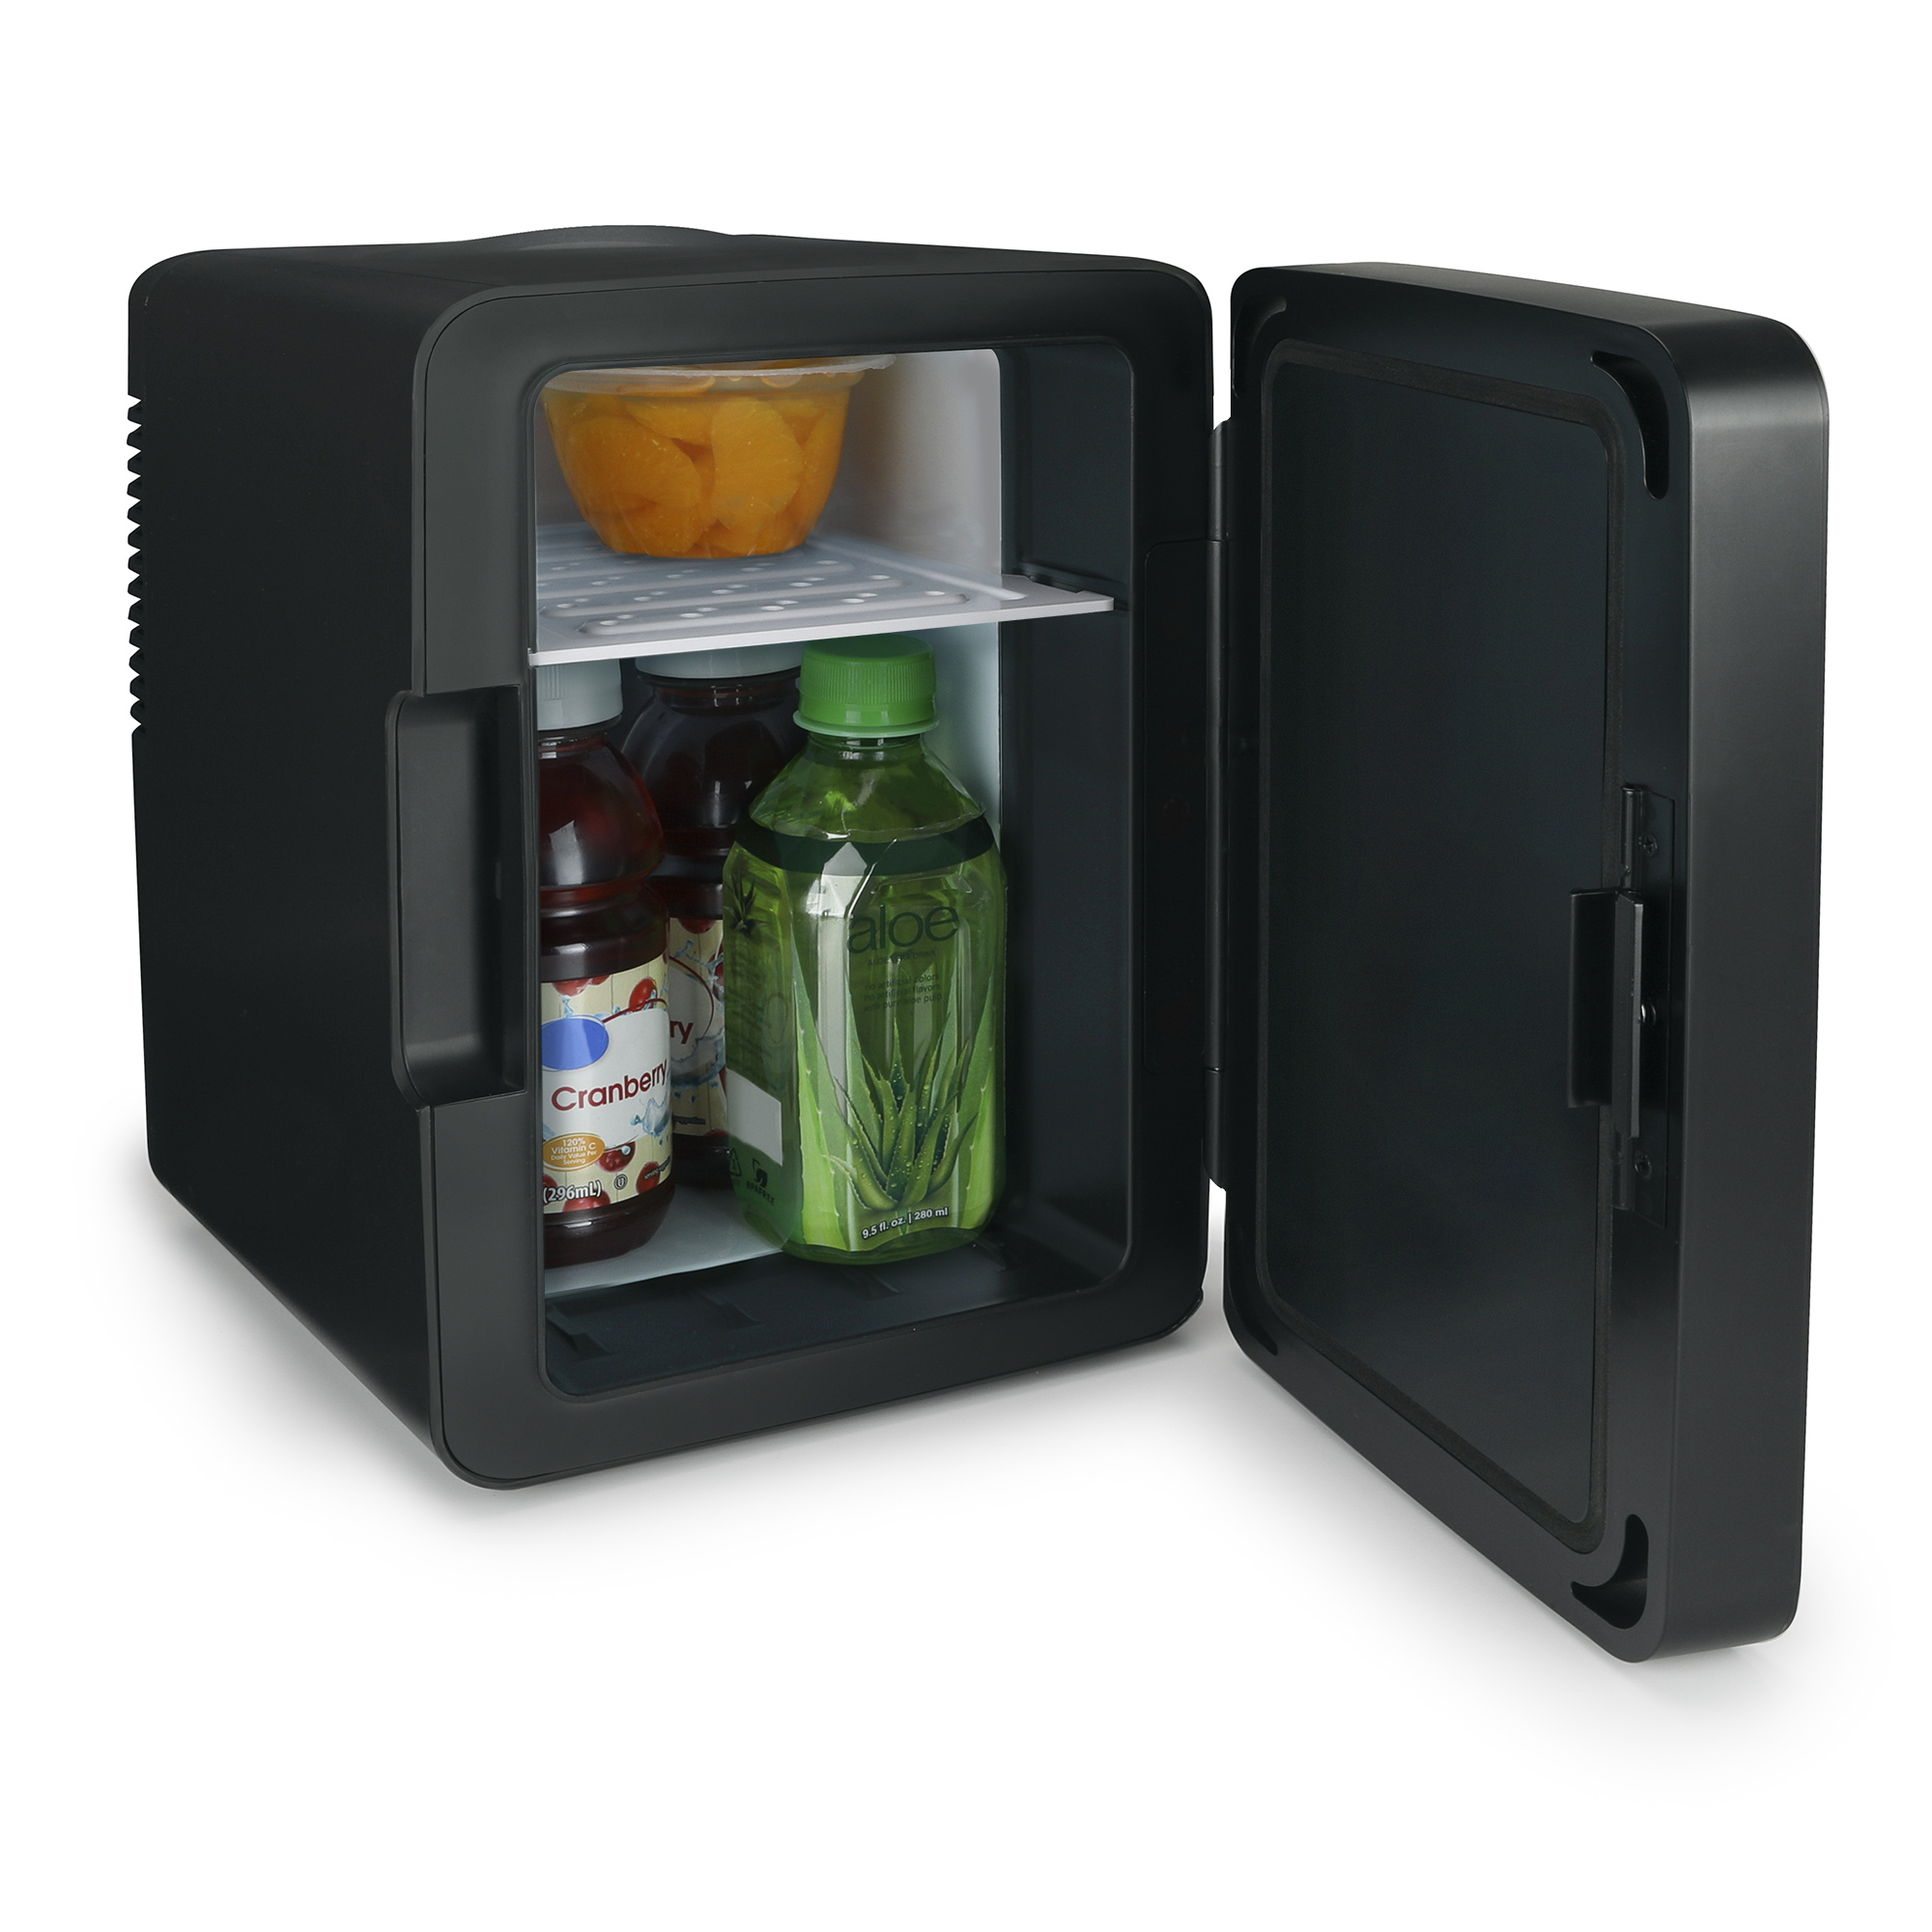 Personal Chiller Mini Fridge Small Space Cooler, Black Marble - image 2 of 11